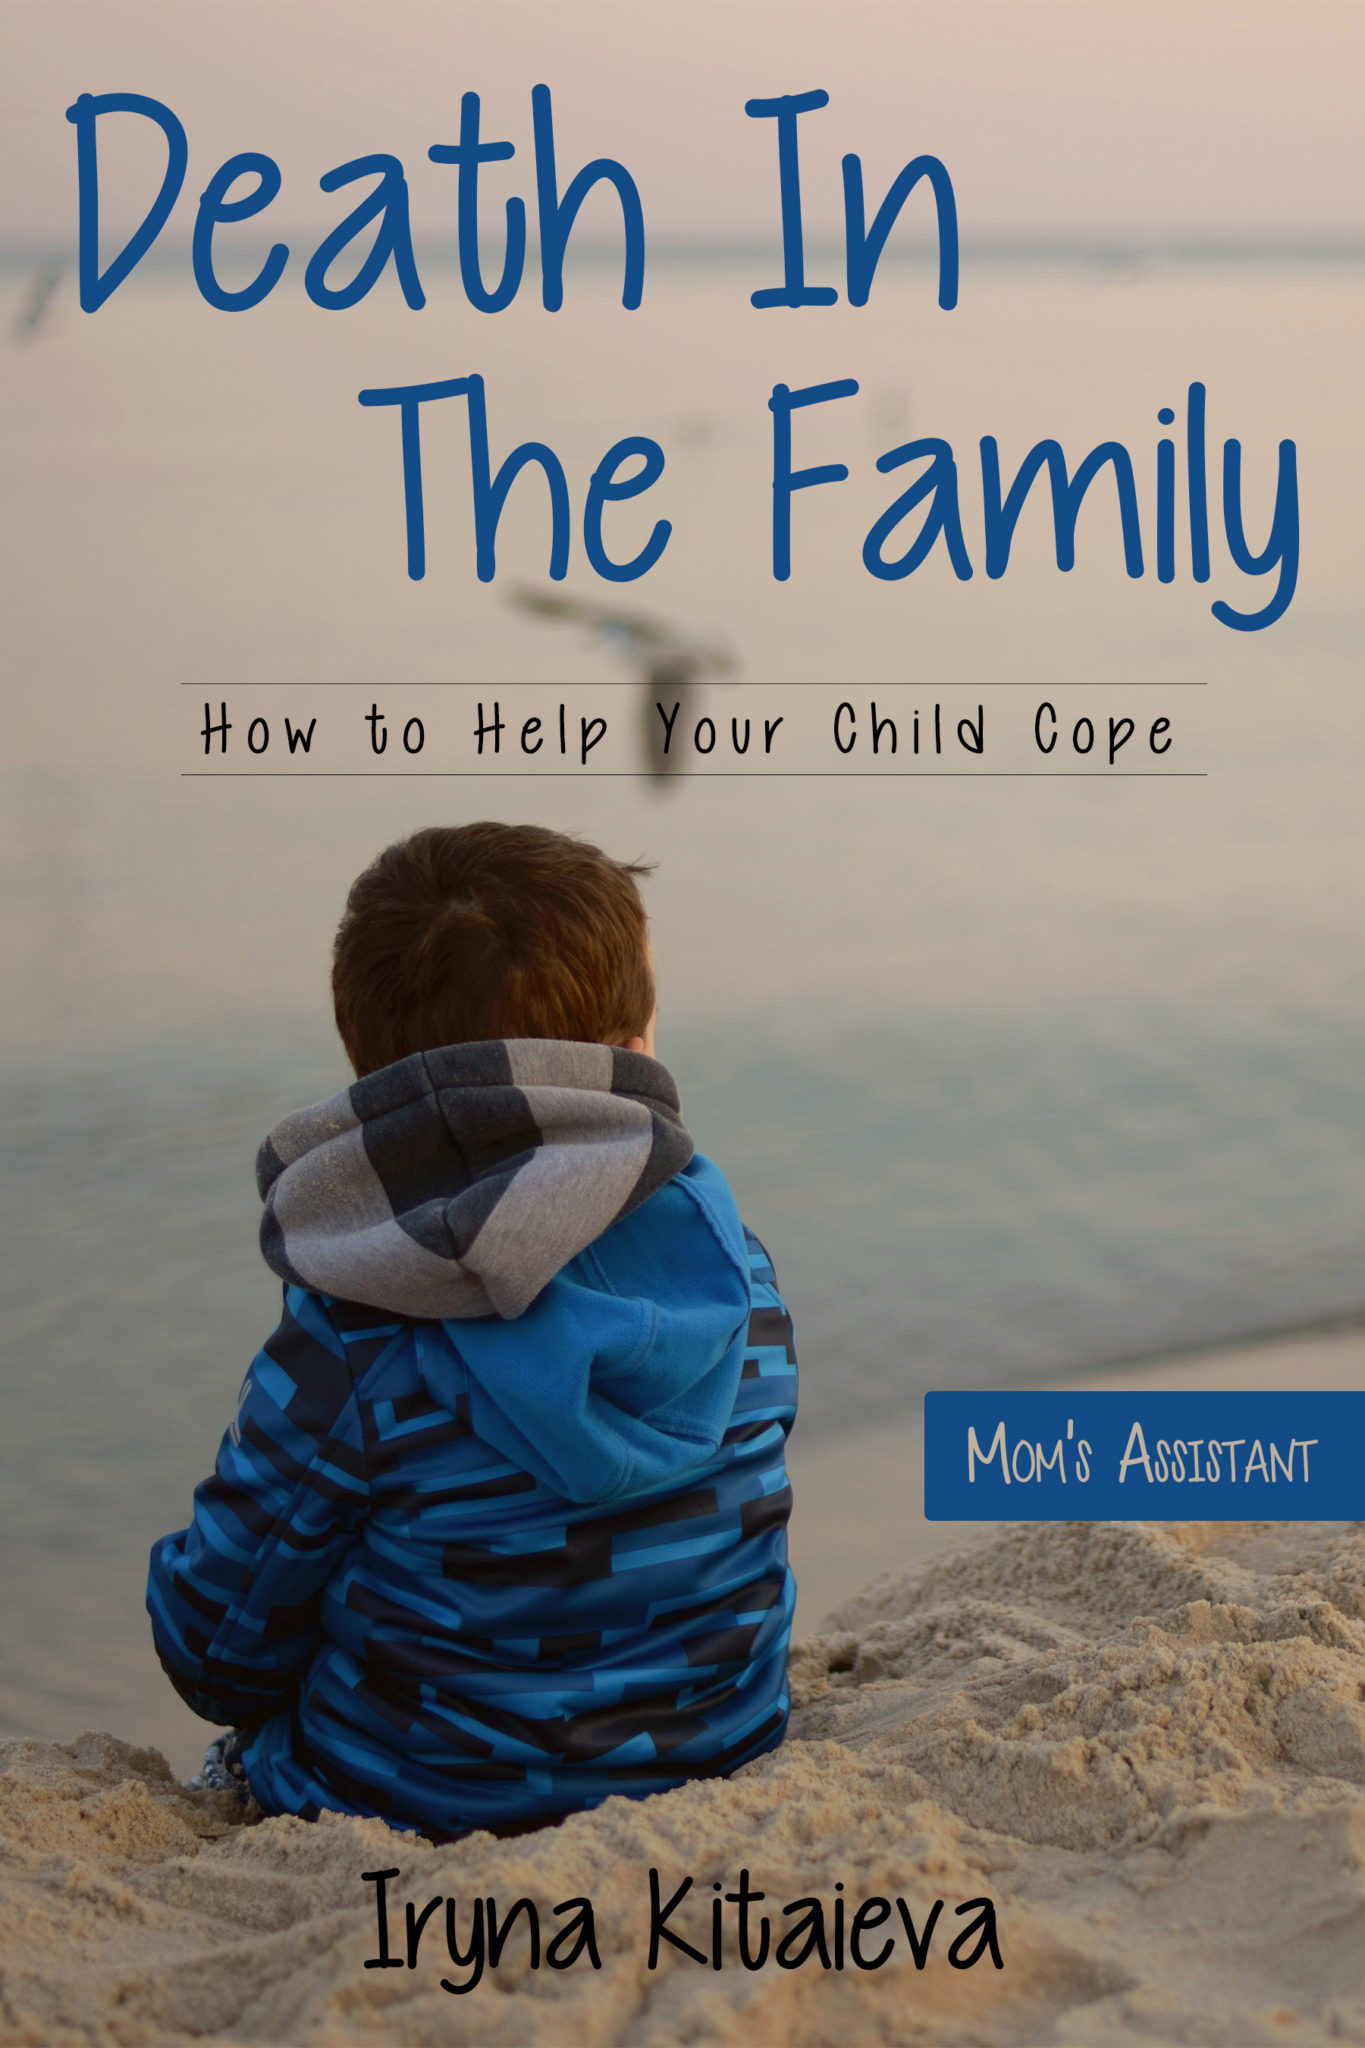 FREE: Death in the family.: How to help your child cope by Iryna Kitaieva